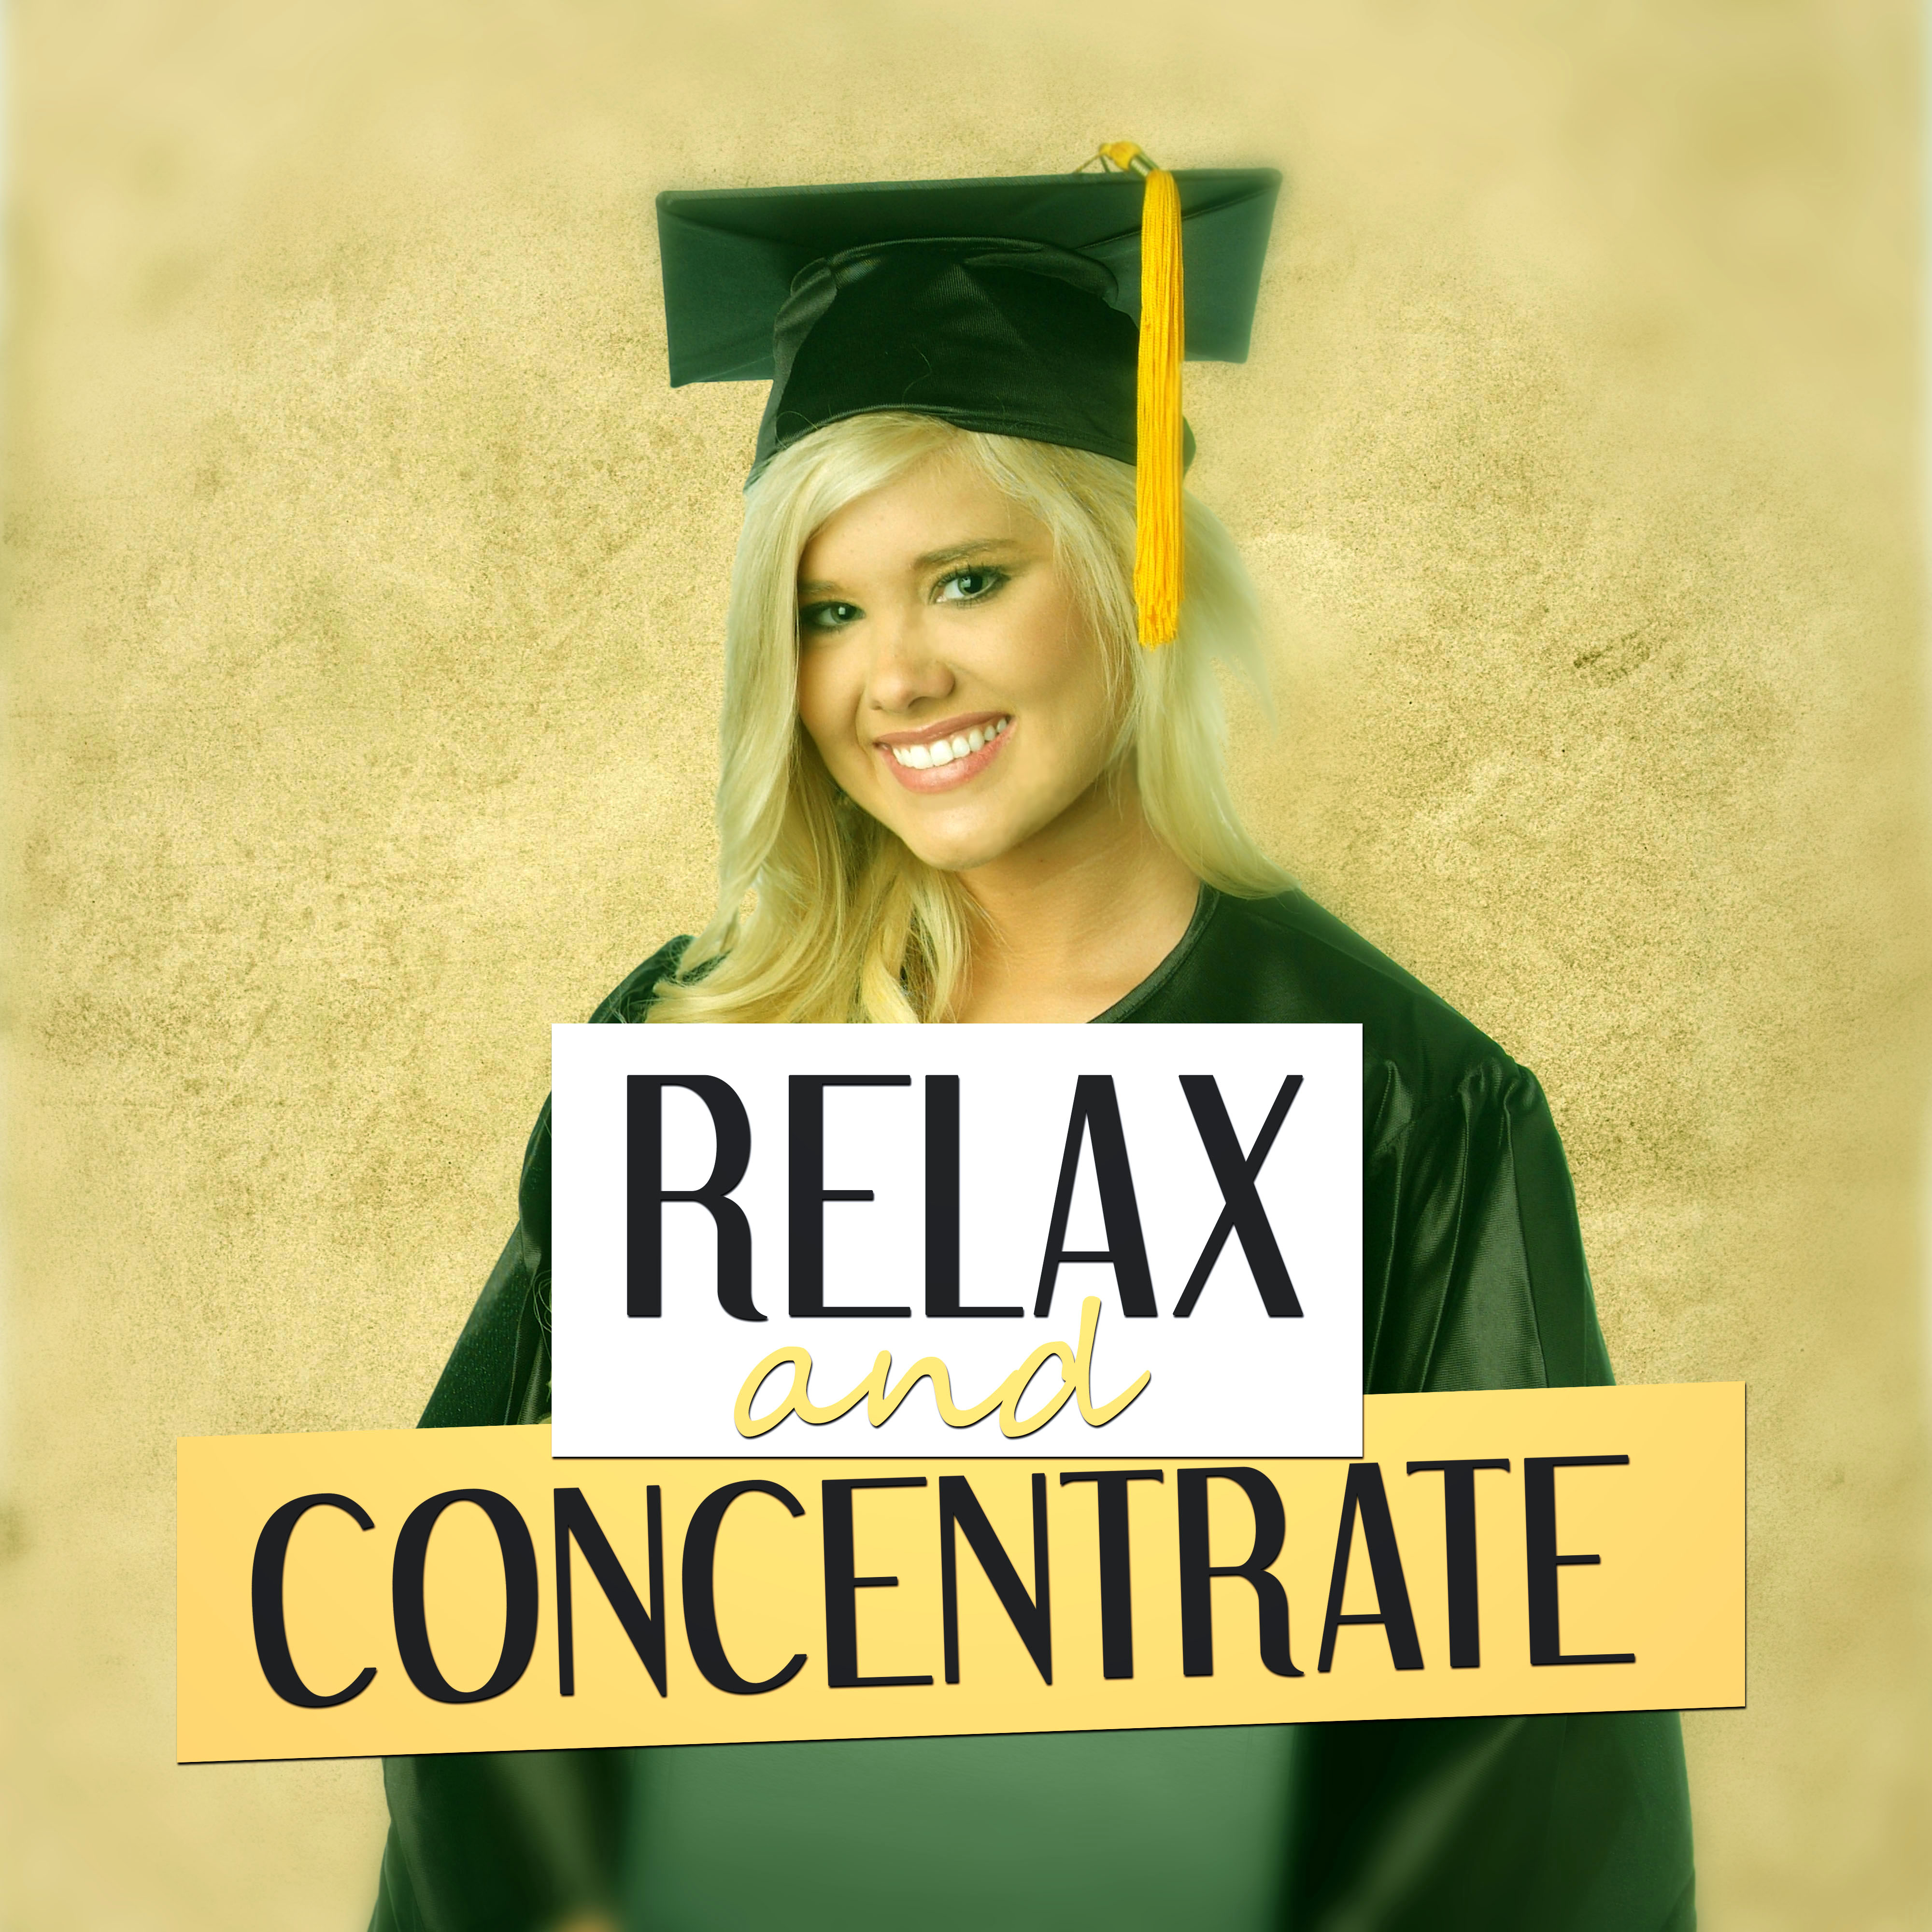 Relax and Concentrate